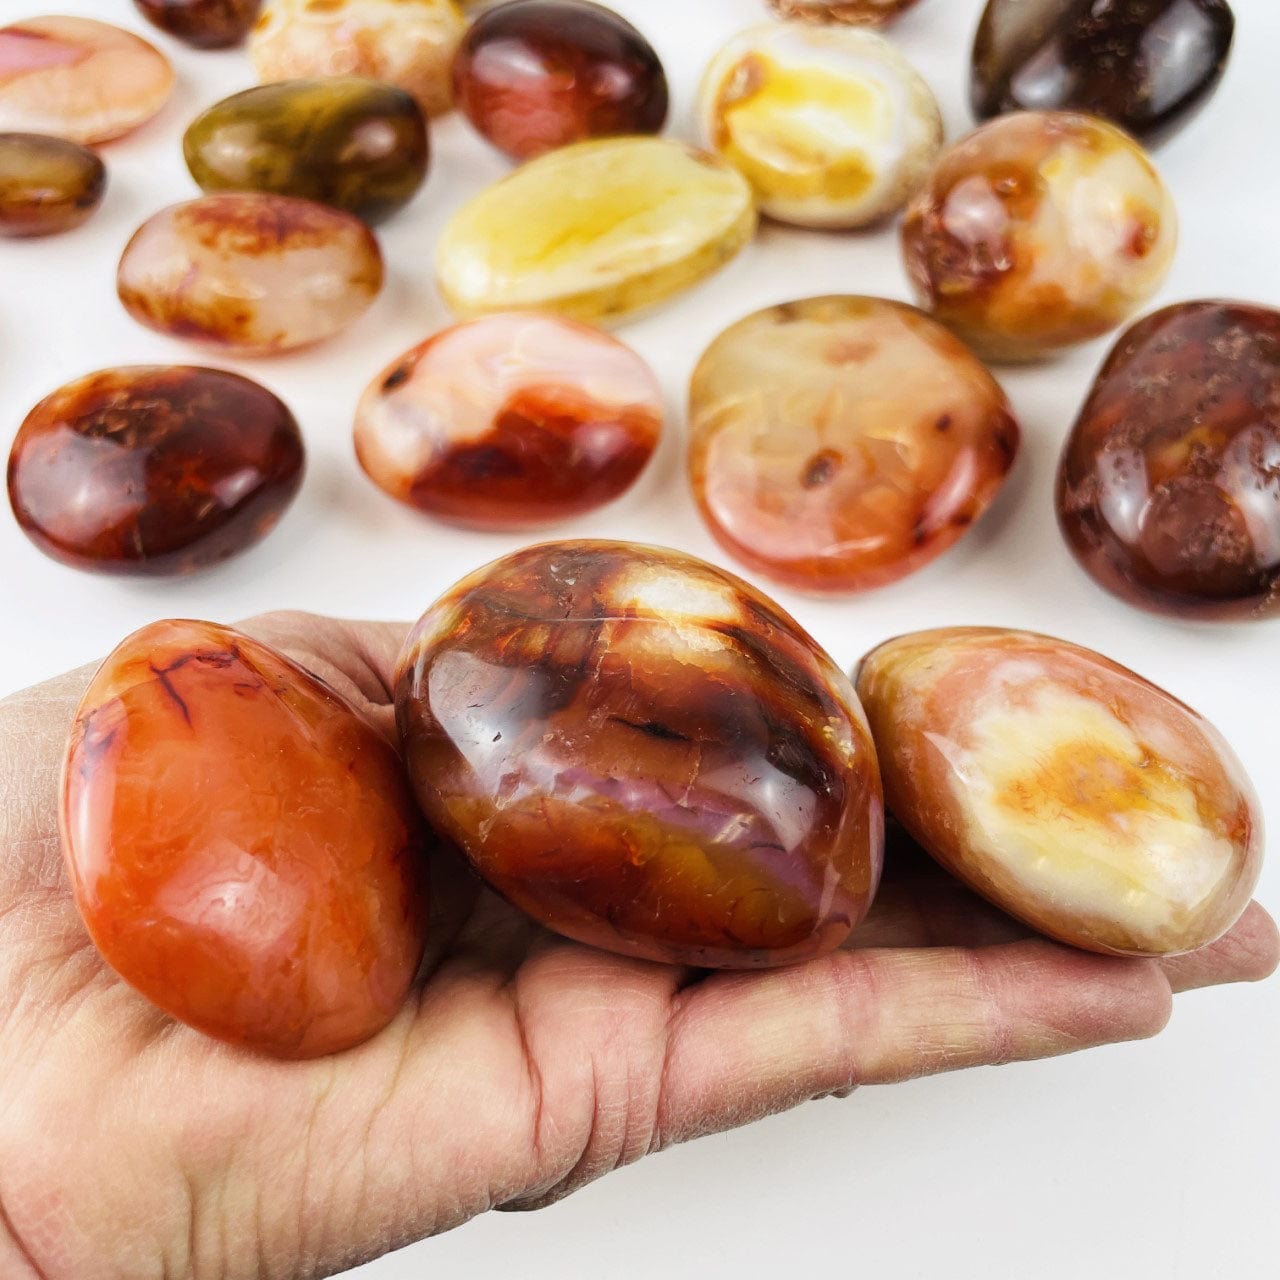 Carnelian Agate Tumbled Stones on a table with 3 in a hand for size reference